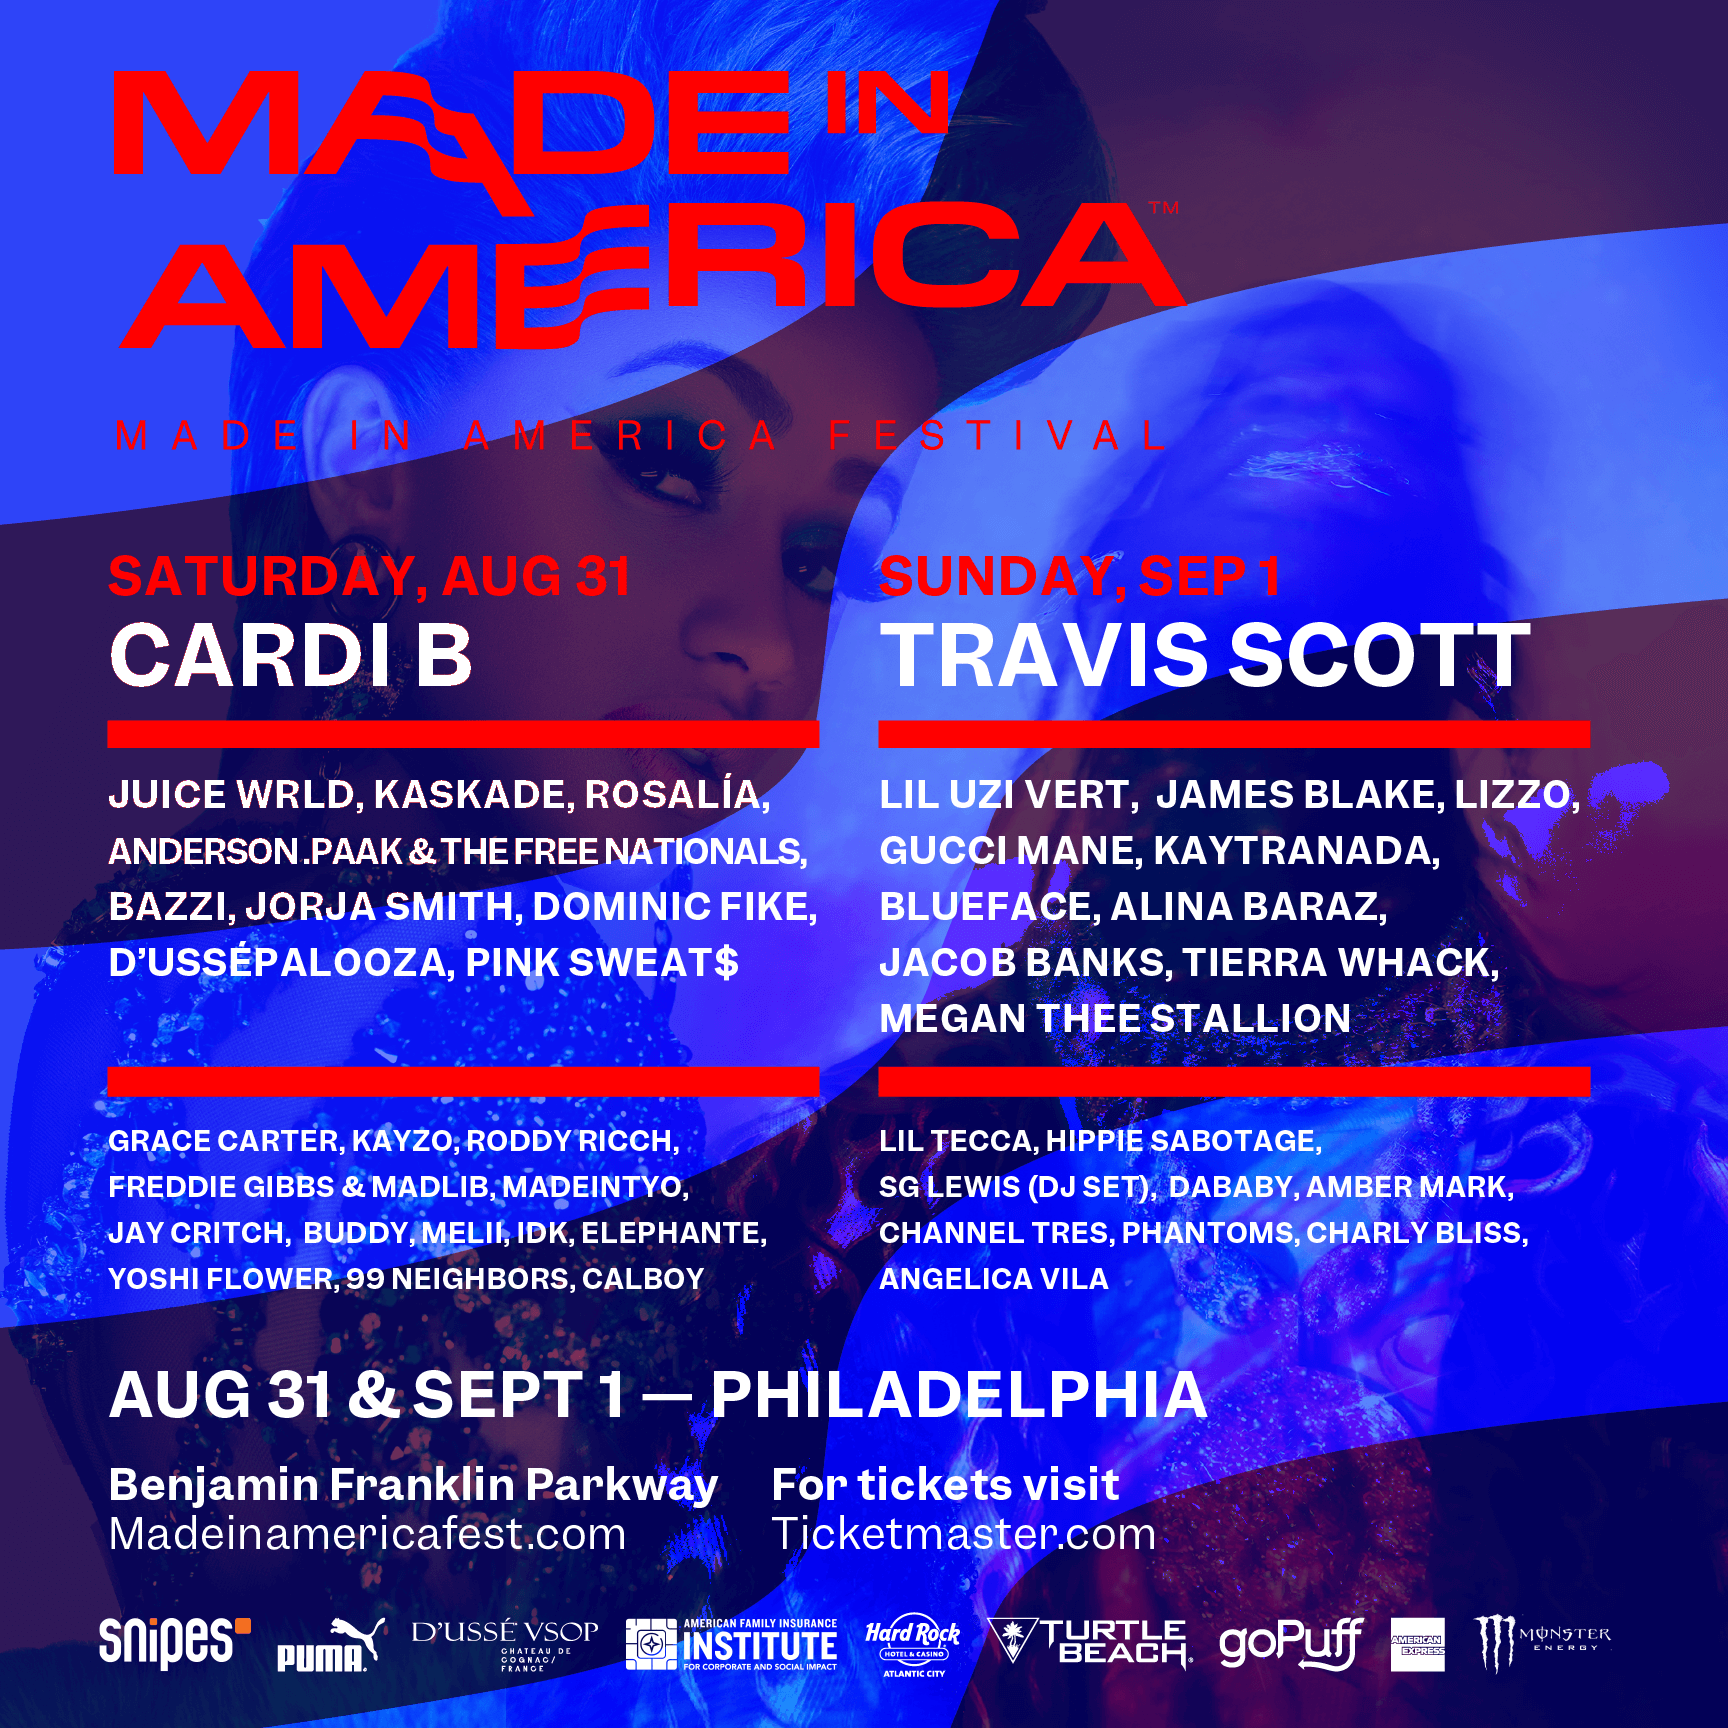 Made In America Festival Single Day Tickets Are Available Here...